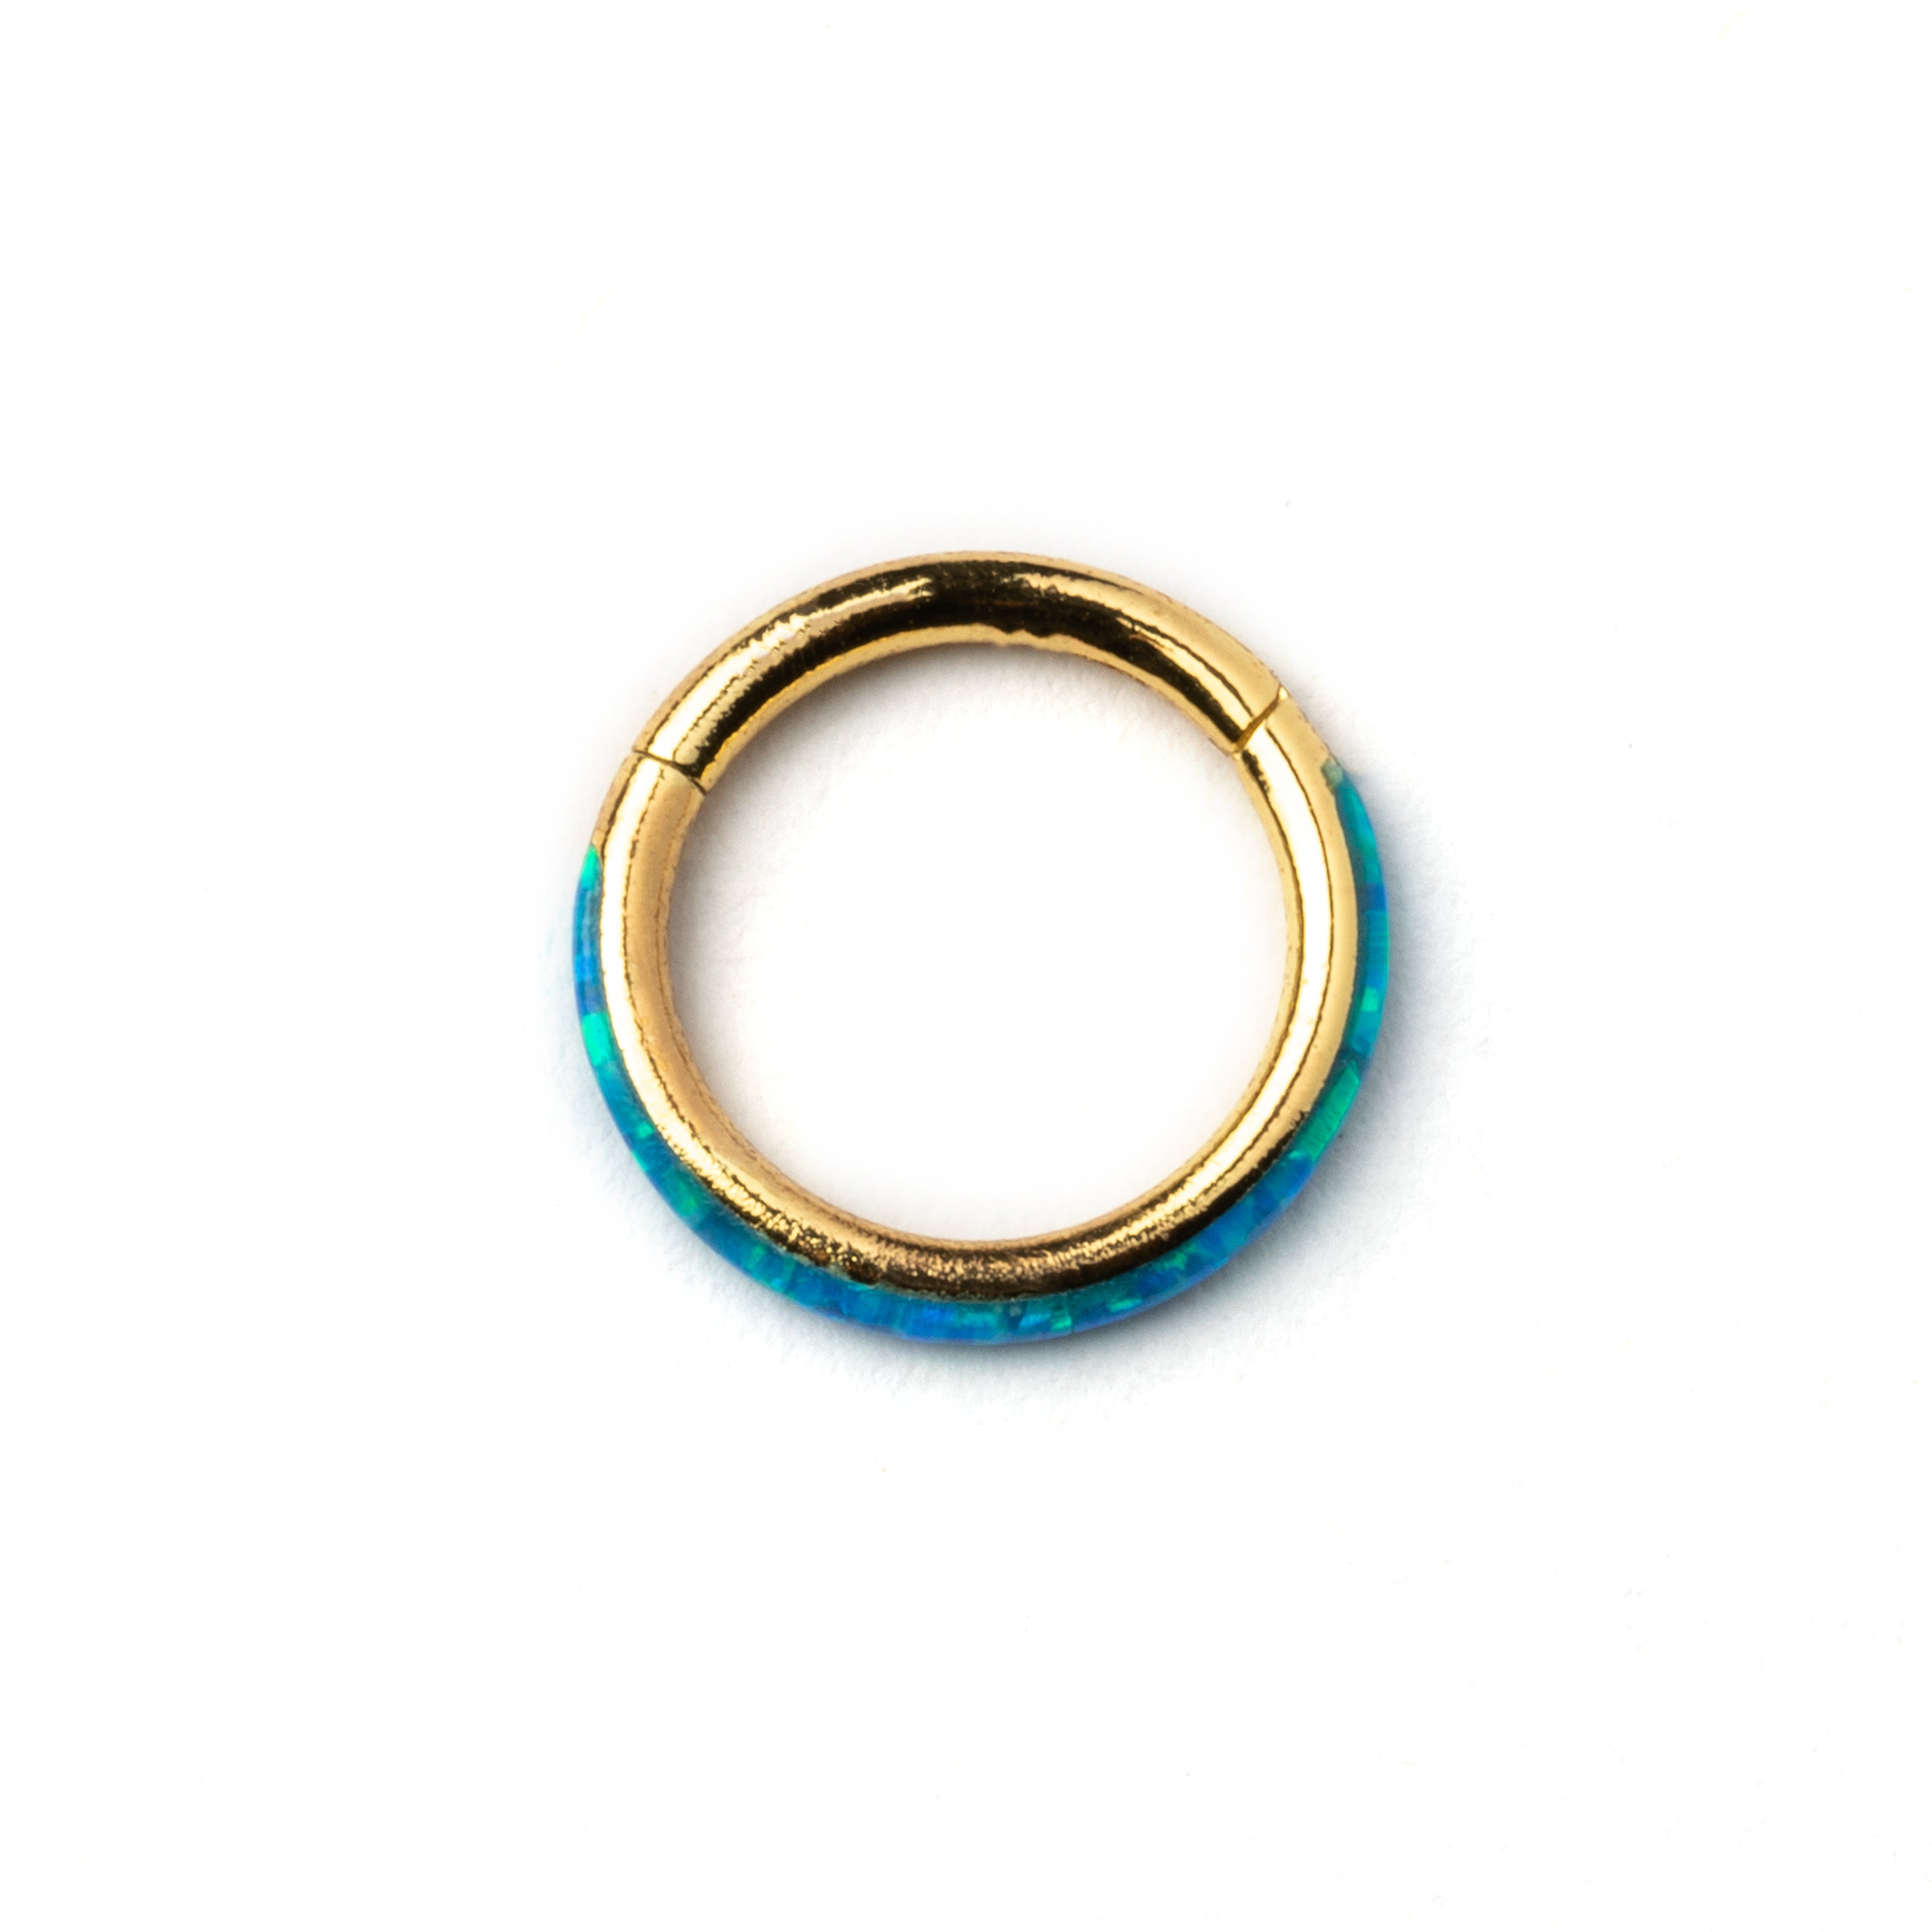 Gold surgical steel septum clicker ring with blue opal inlay frontal view